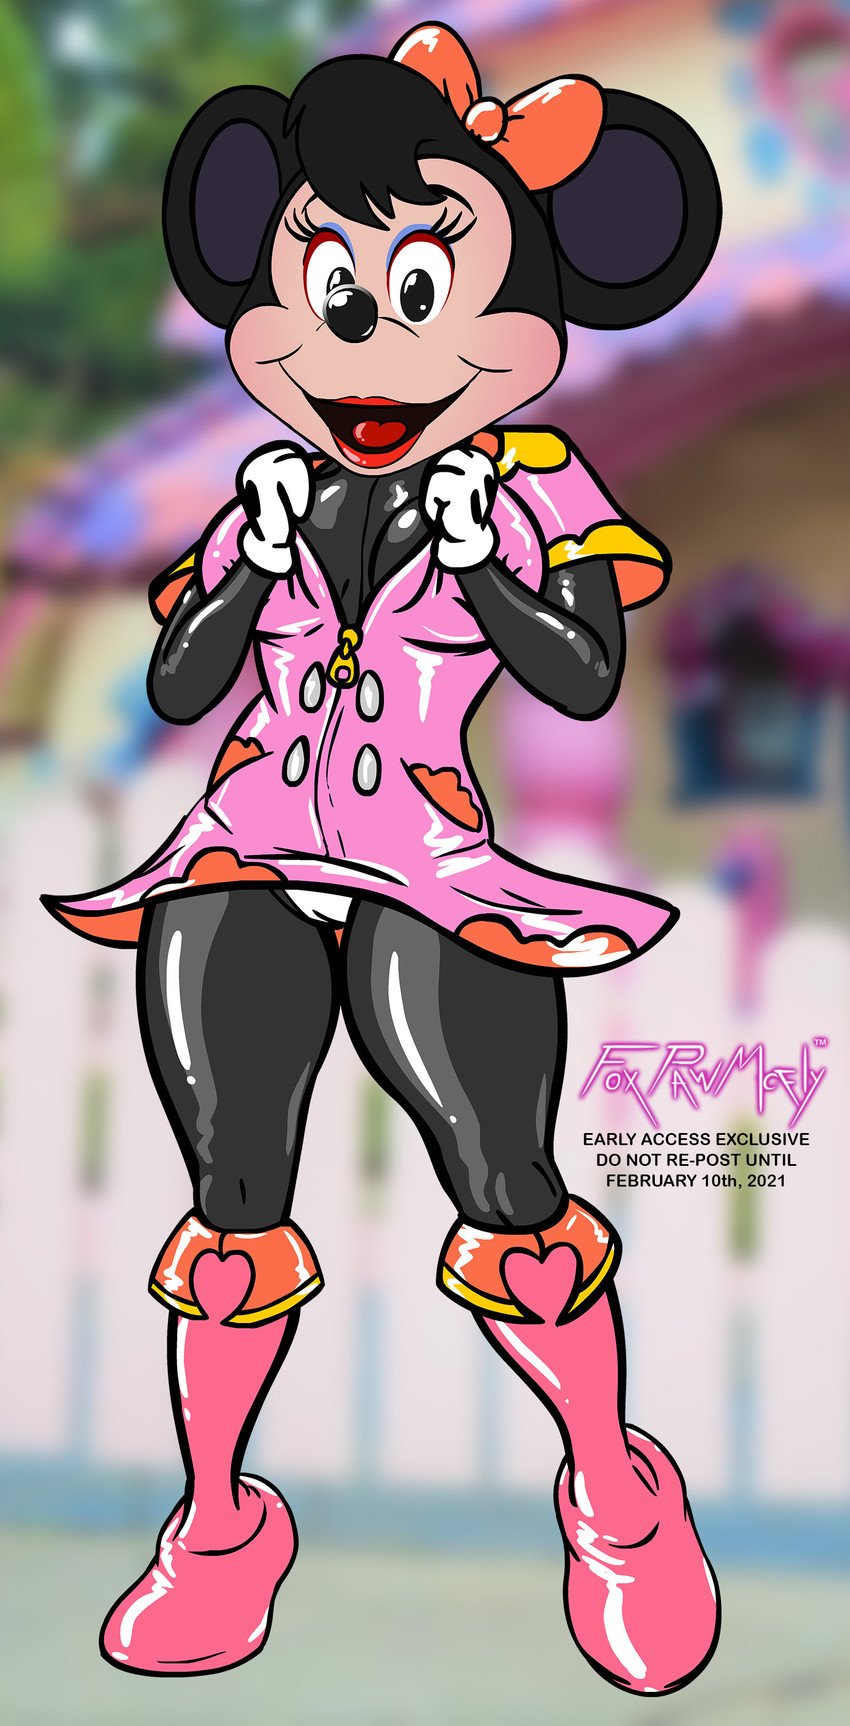 minnie mouse (disney) created by foxpawmcfly